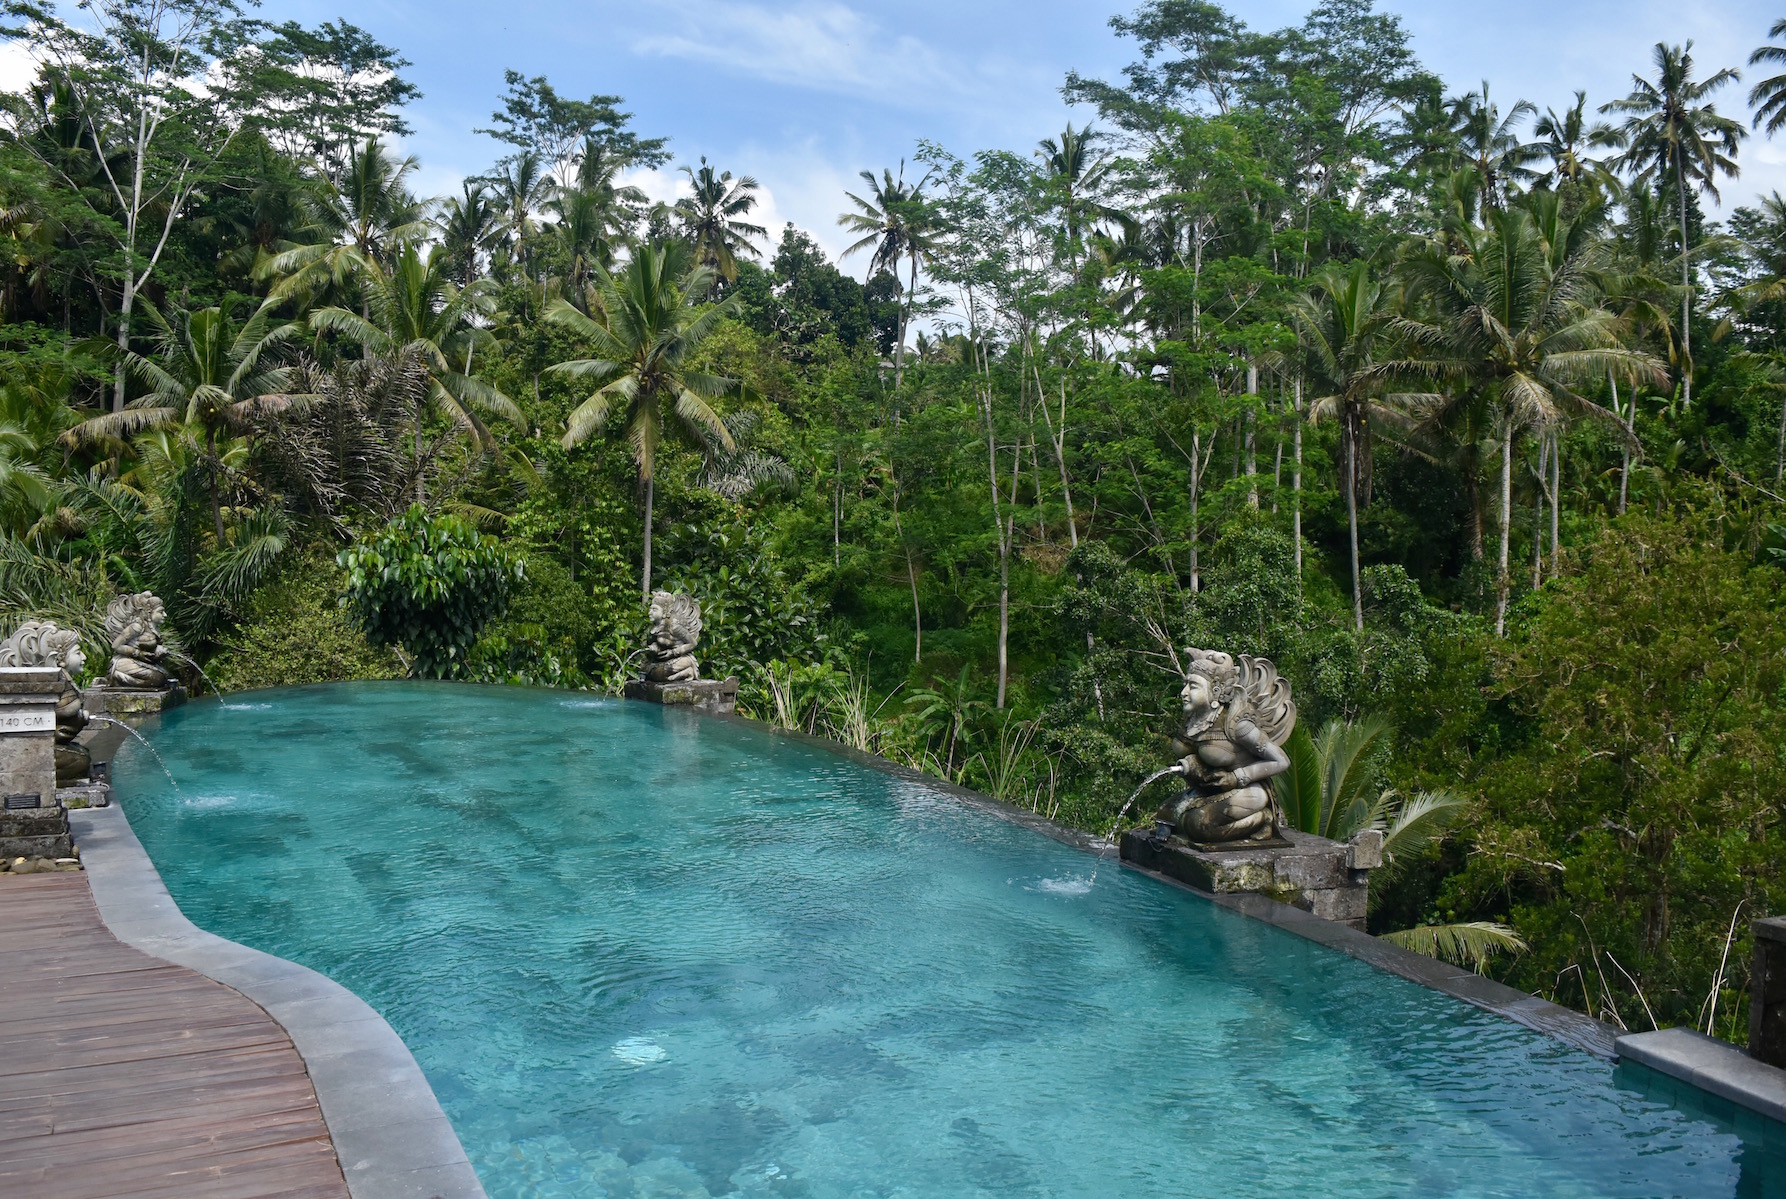 A infinity pool in the jungle